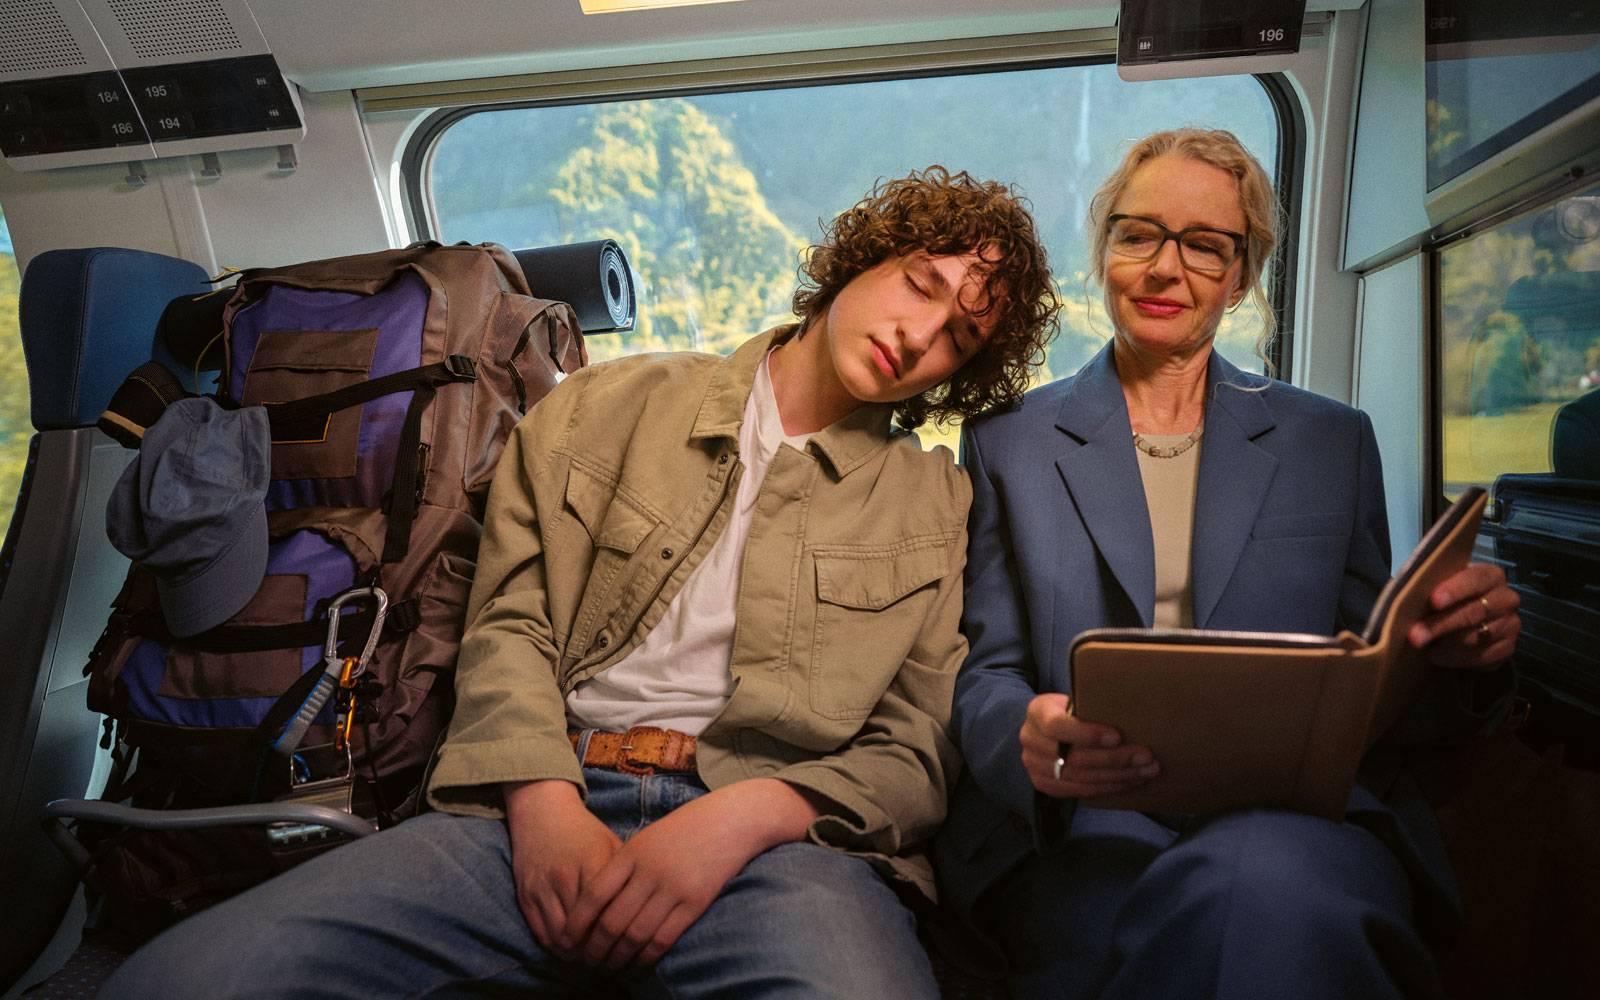 Young man falling asleep on train next to a woman